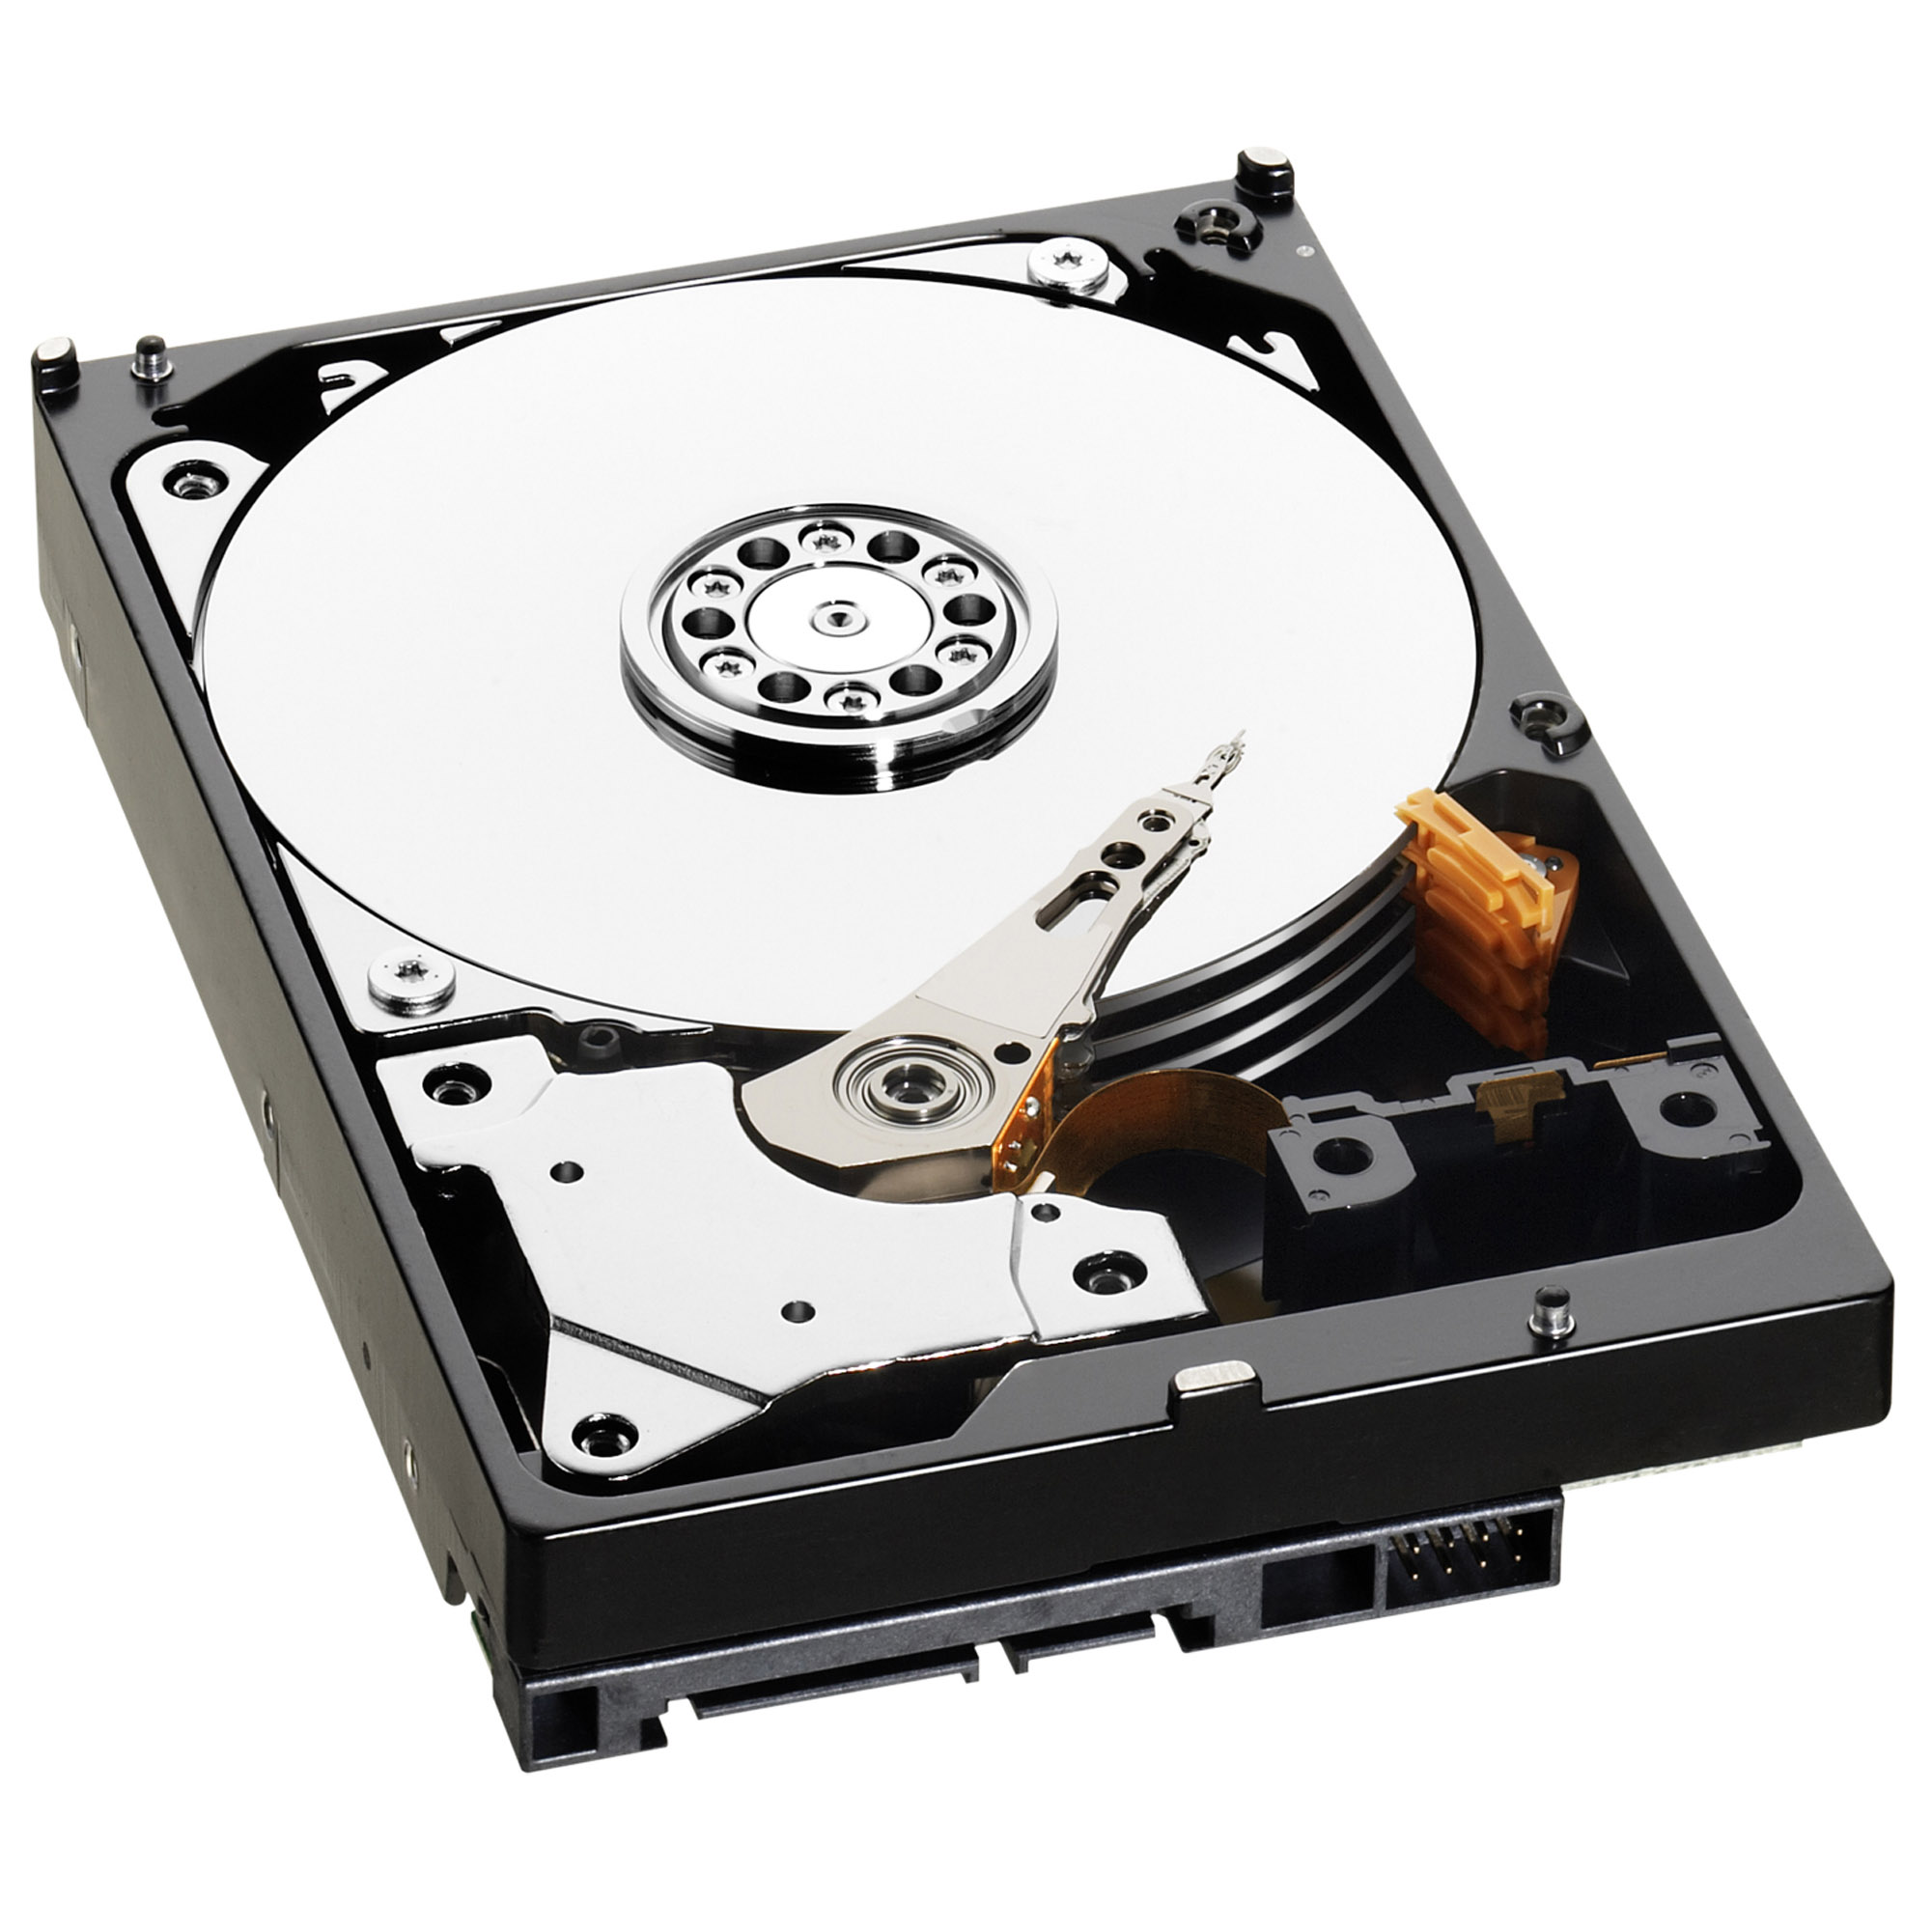 Five tips for restoring an unbootable hard drive